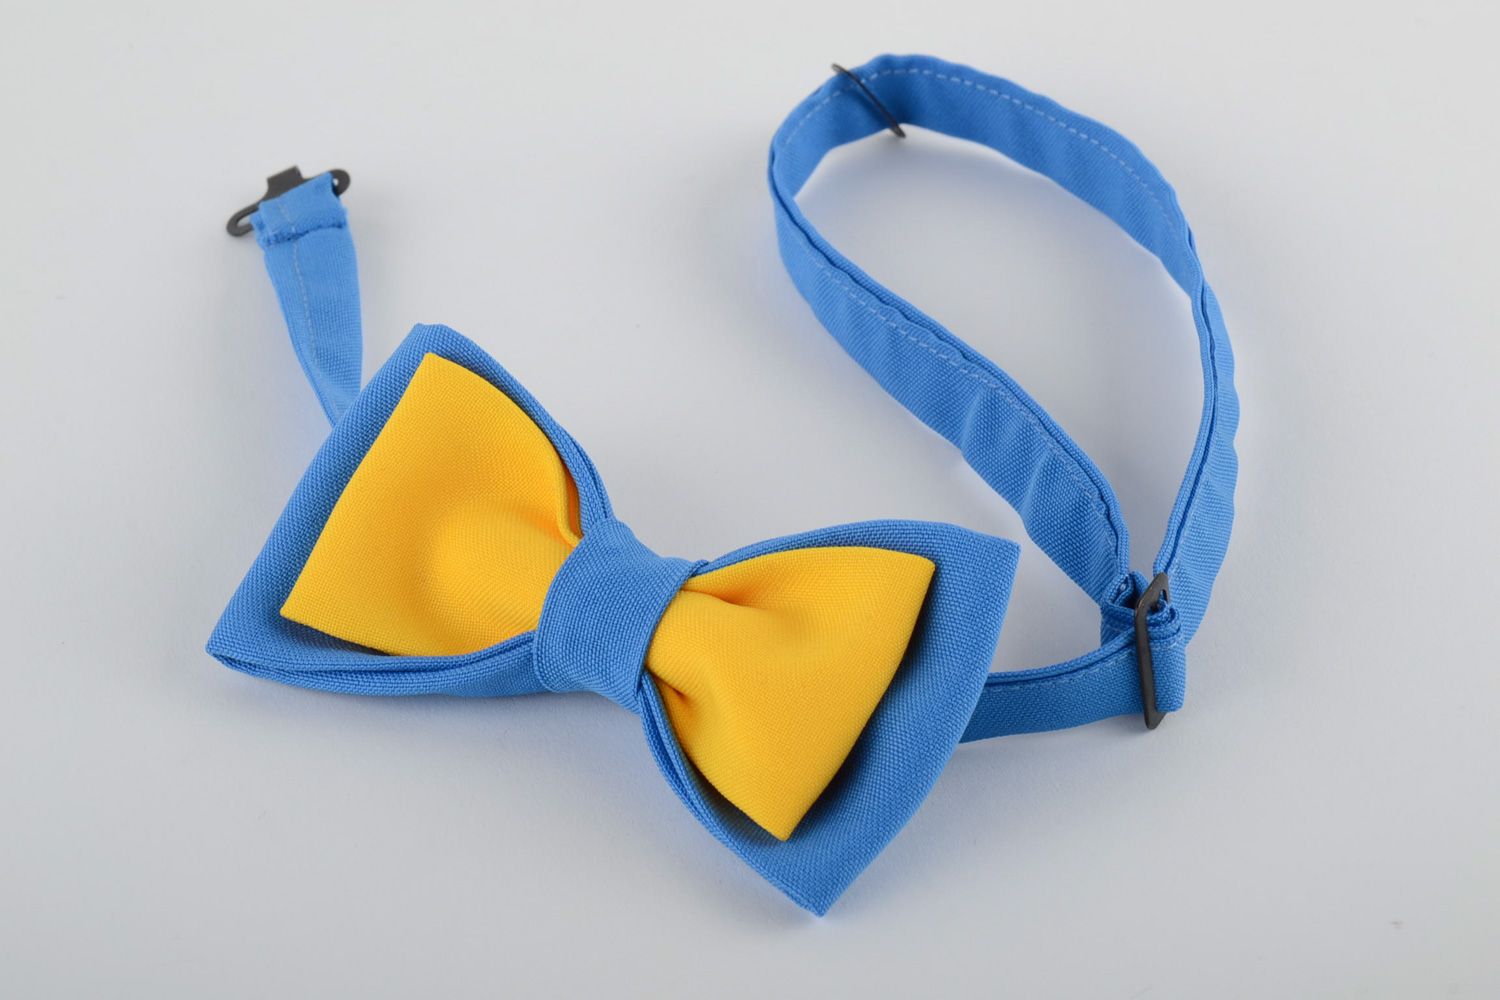 Handmade bow tie sewn of costume fabric in contrast combination of blue and yellow photo 2